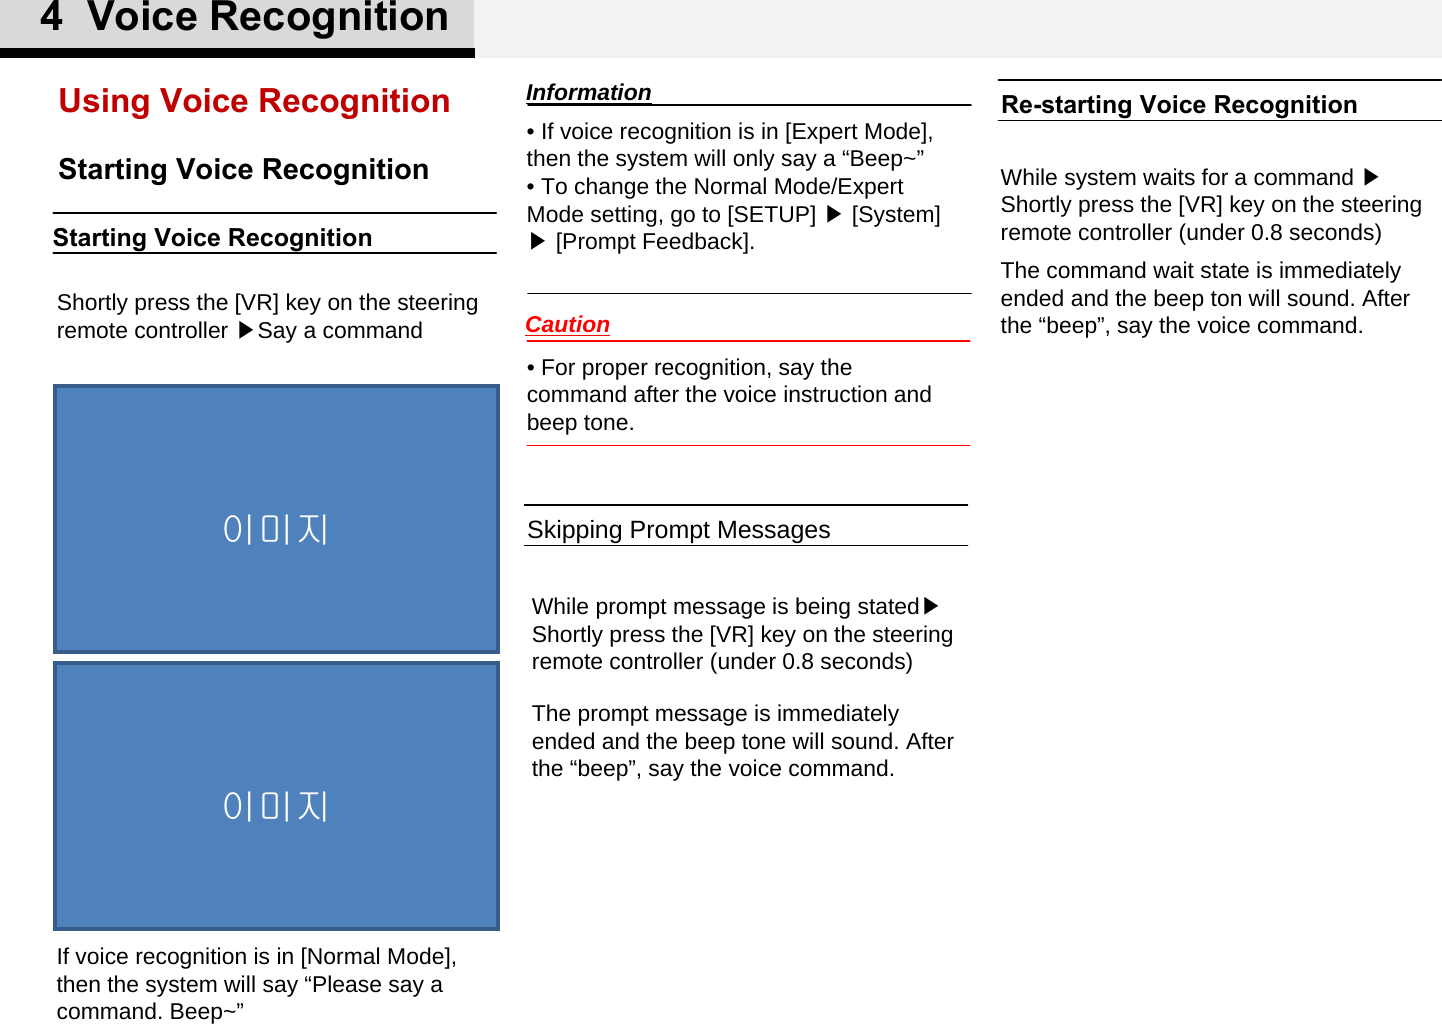 • If voice recognition is in [Expert Mode], then the system will only say a “Beep~”• To change the Normal Mode/Expert Mode setting, go to [SETUP] ▶[System] ▶[Prompt Feedback]. Starting Voice RecognitionUsing Voice RecognitionShortly press the [VR] key on the steering remote controller ▶Say a commandThe prompt message is immediately ended and the beep tone will sound. After the “beep”, say the voice command.If voice recognition is in [Normal Mode], then the system will say “Please say a command. Beep~”While prompt message is being stated▶ Shortly press the [VR] key on the steering remote controller (under 0.8 seconds)The command wait state is immediately ended and the beep ton will sound. After the “beep”, say the voice command.While system waits for a command ▶ Shortly press the [VR] key on the steering remote controller (under 0.8 seconds)• For proper recognition, say the command after the voice instruction and beep tone.Skipping Prompt MessagesRe-starting Voice Recognition이미지이미지4  Voice RecognitionInformationCautionStarting Voice Recognition